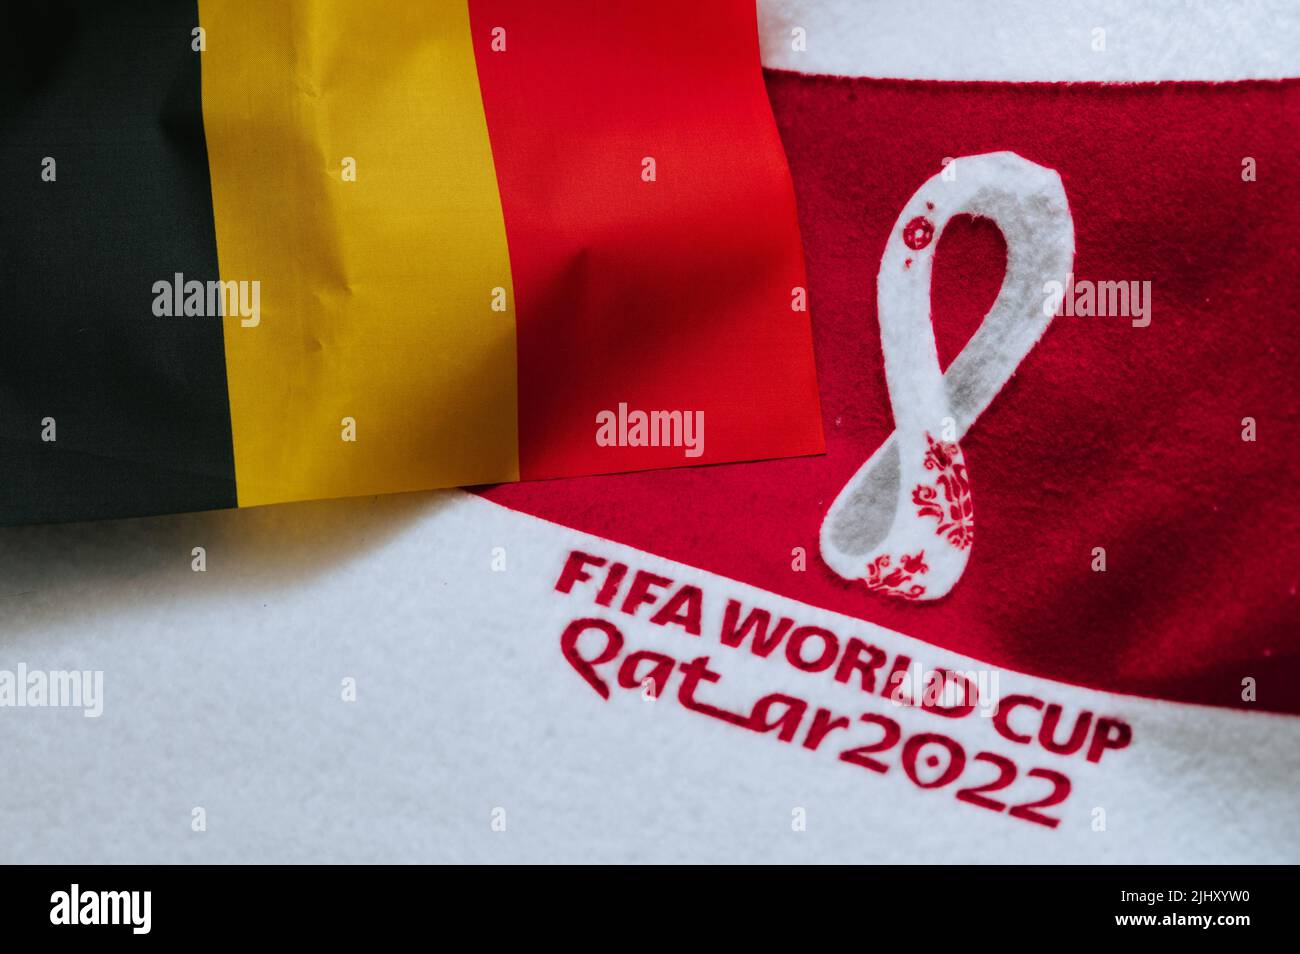 QATAR, DOHA, 18 JULY, 2022: Belgium National flag and logo of FIFA World Cup in Qatar 2022 on red carpet. Soccer sport background, edit space. Qatar 2 Stock Photo